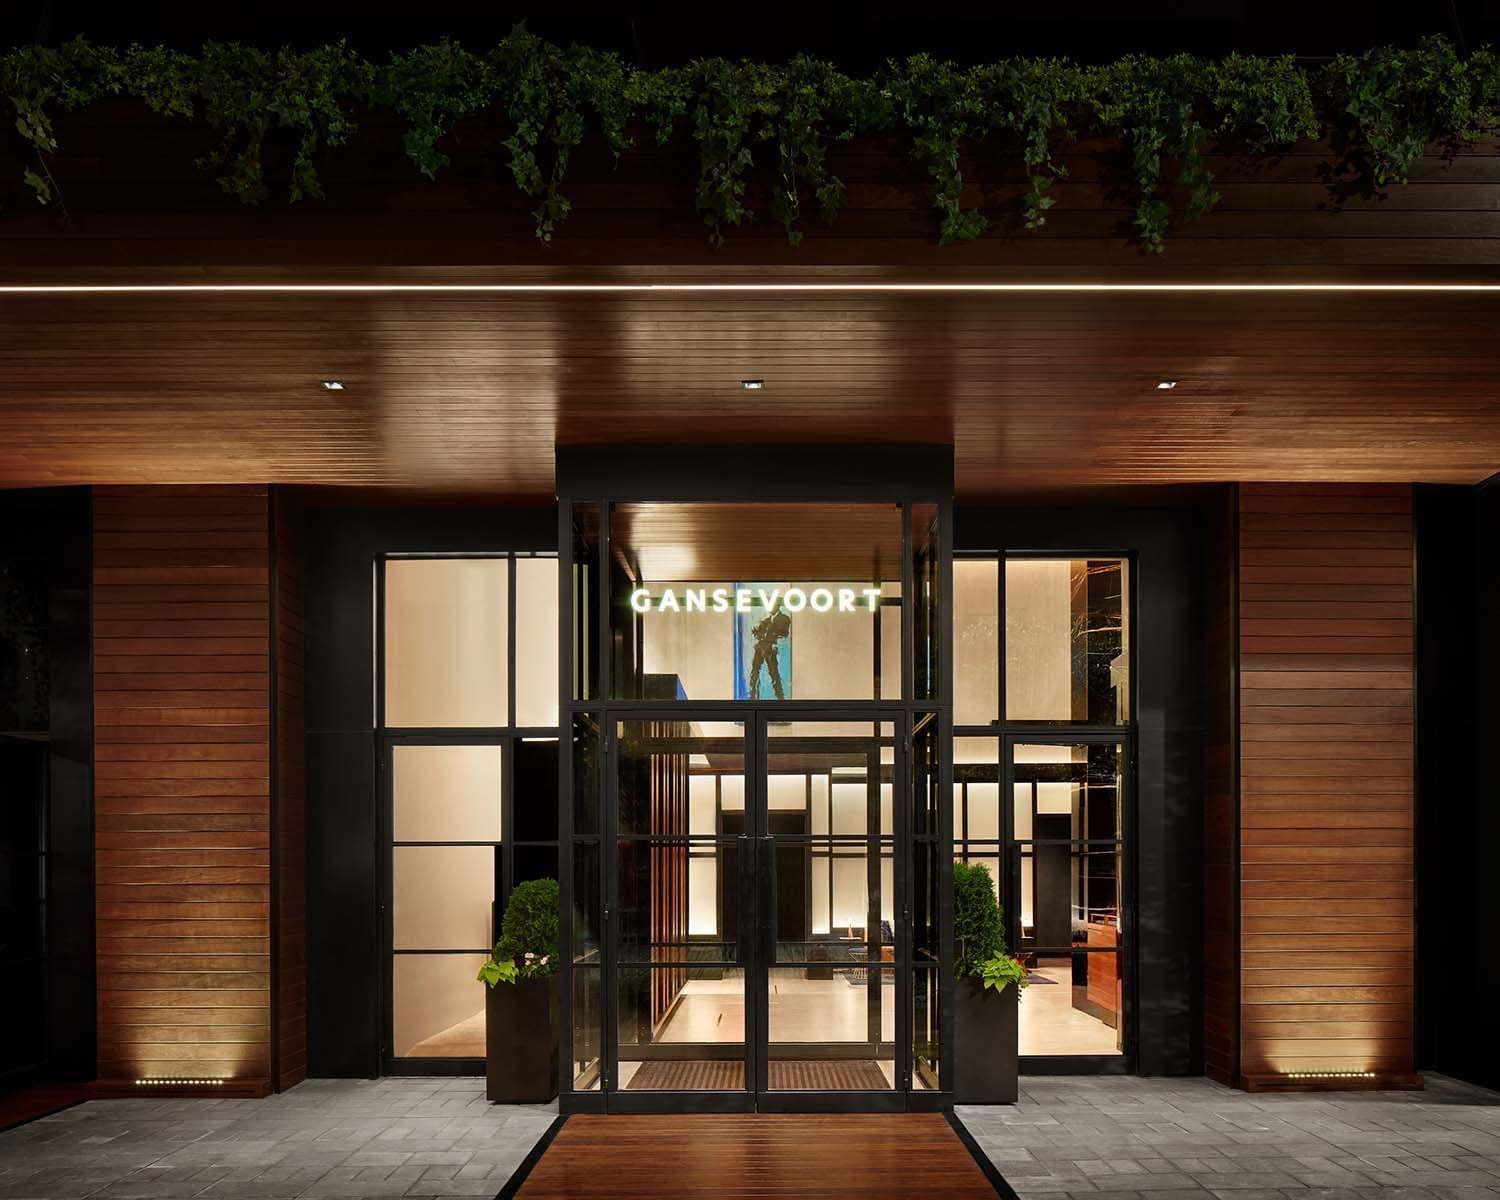 Main entrance boutique hotel in Meatpacking District - Gansevoort